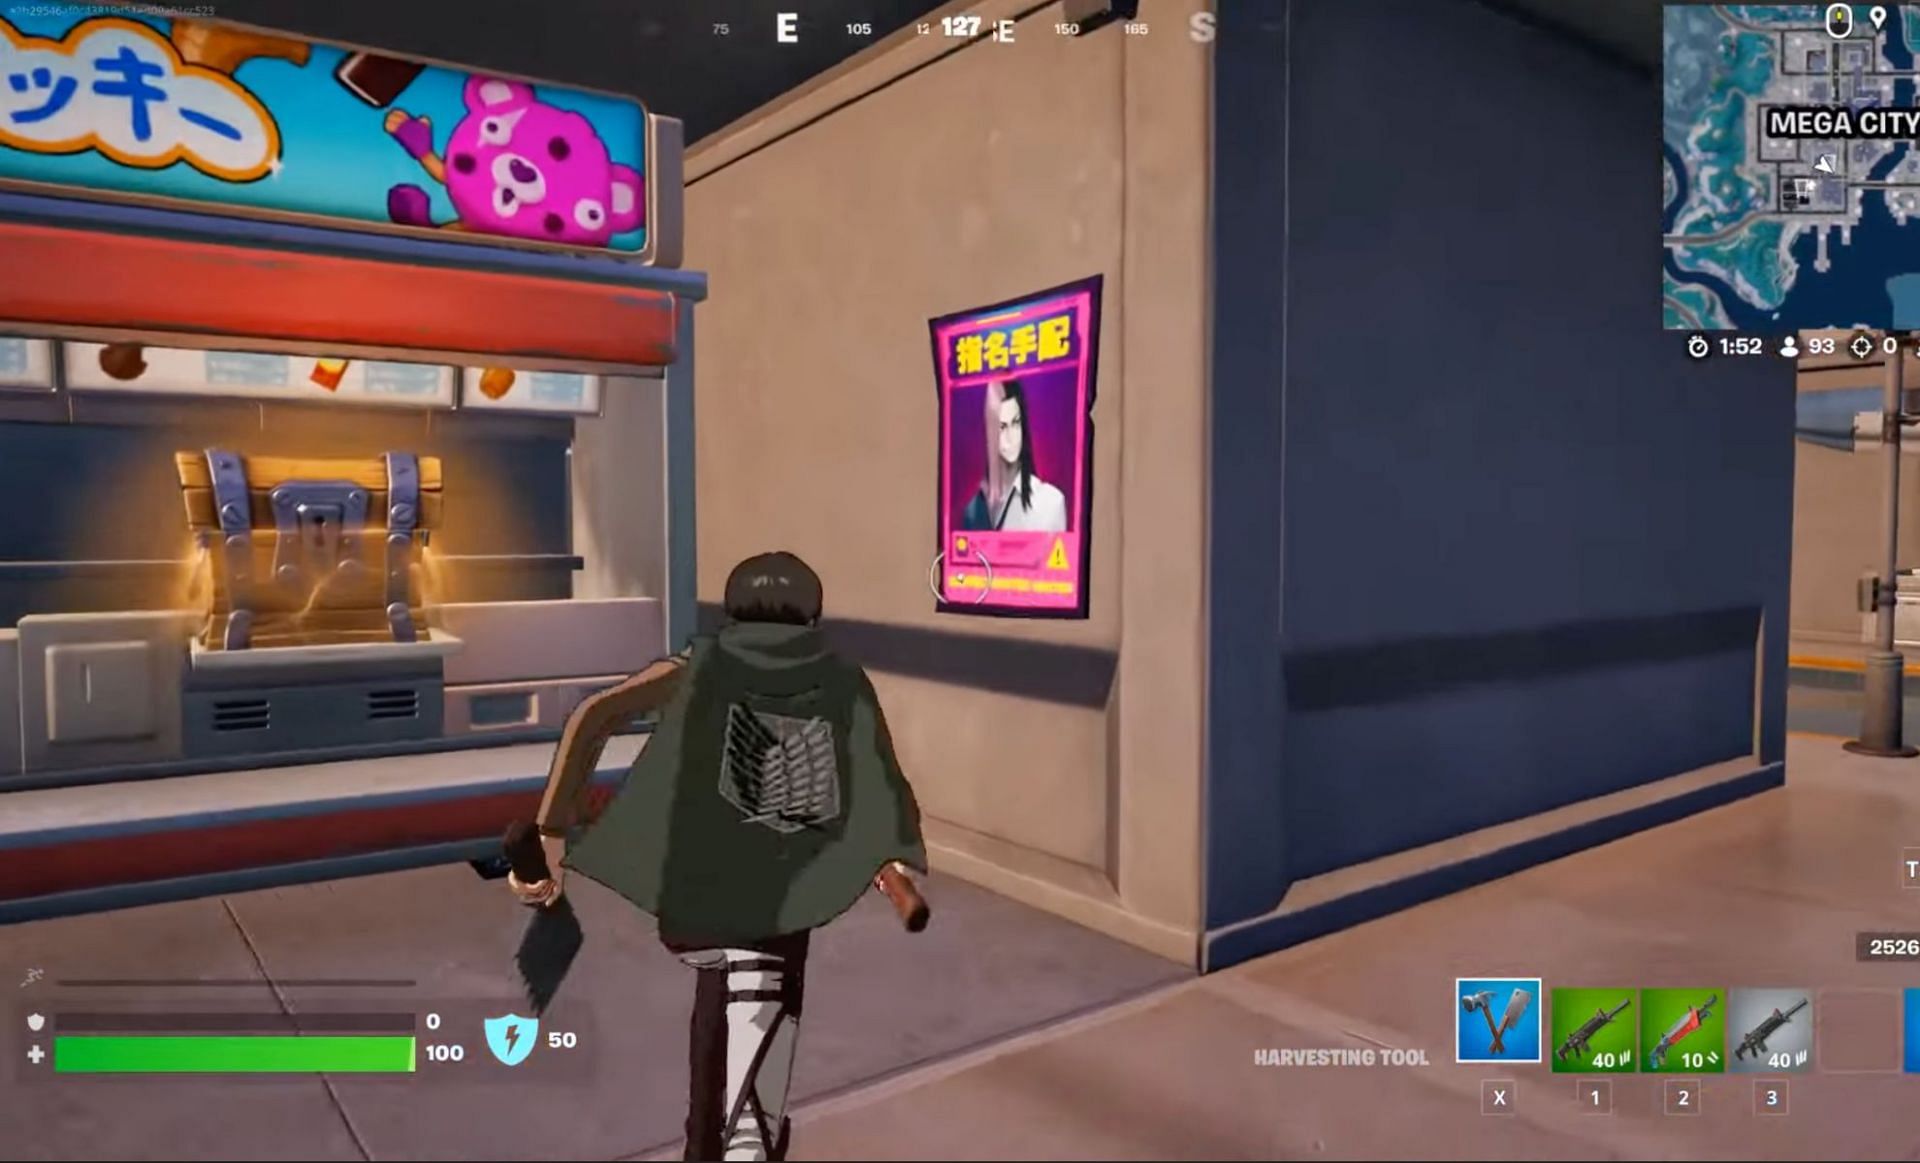 Where to put up Wanted Posters in Fortnite (Image via Bodil40 on YouTube)